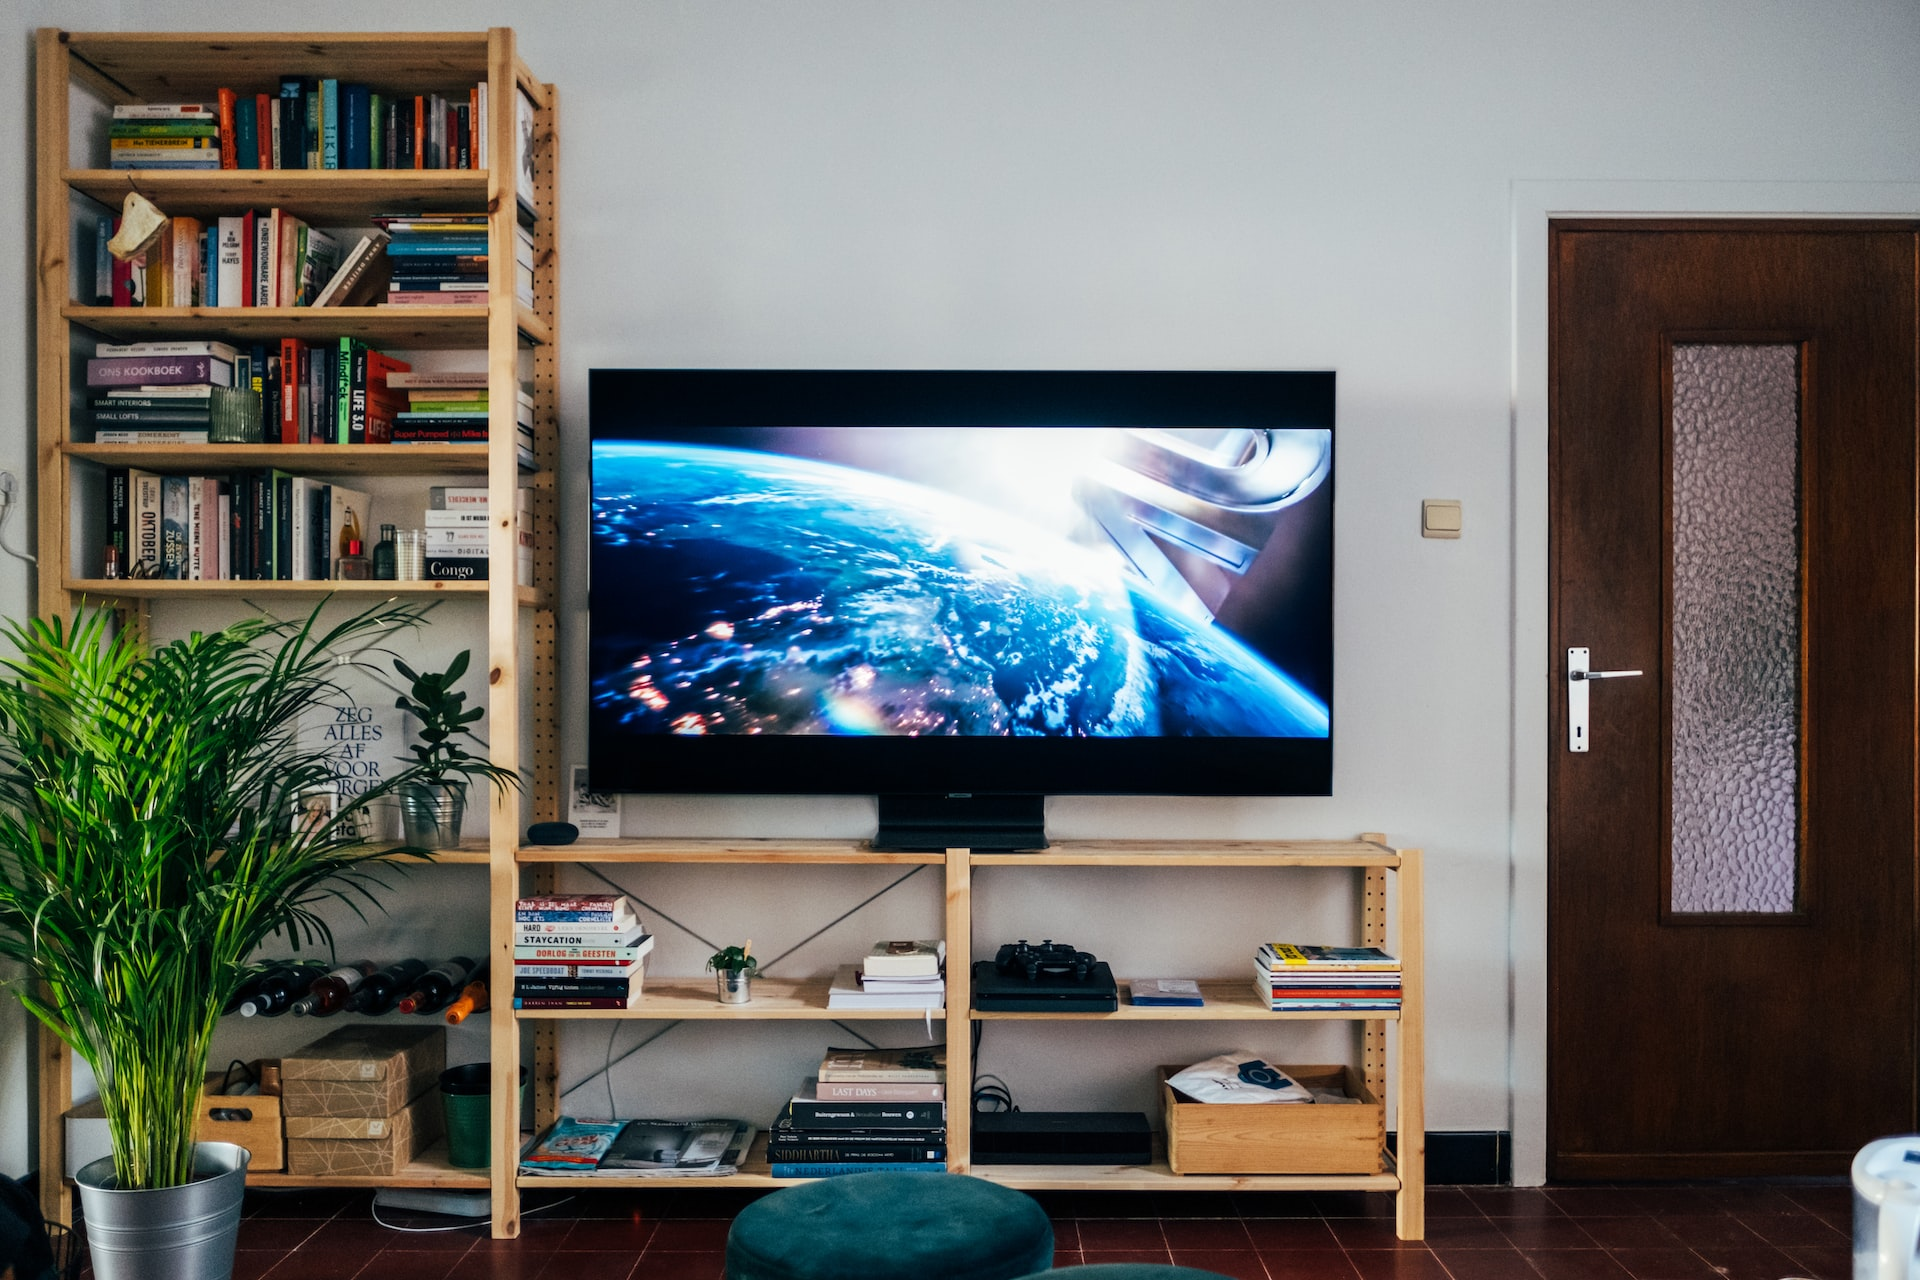  a TV playing in a living room